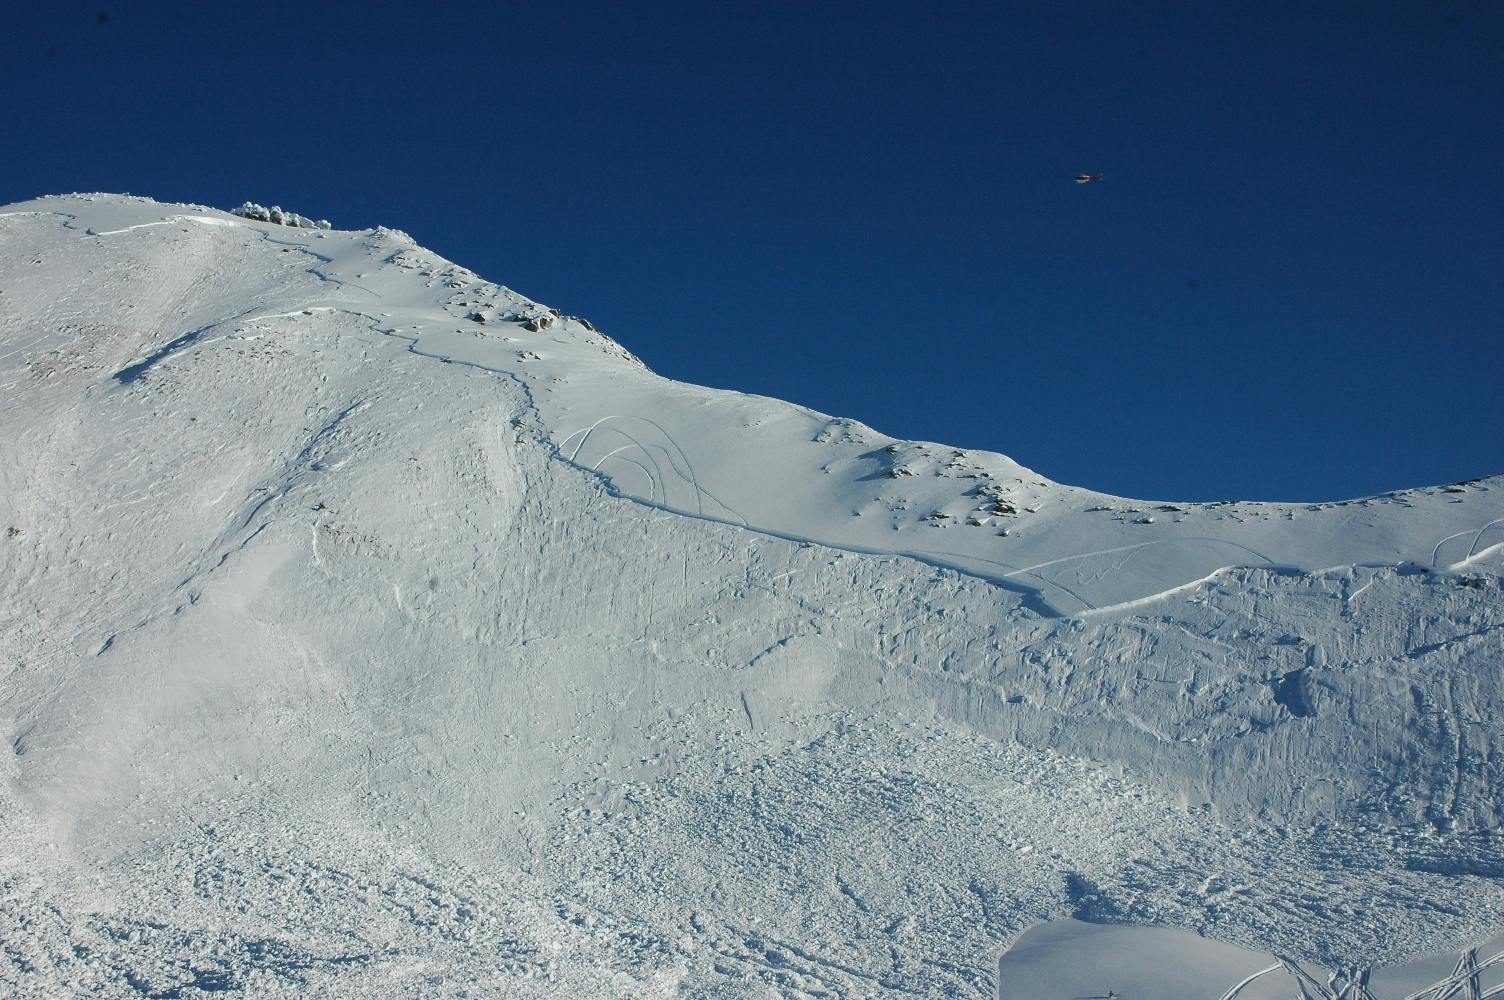 The fracture line of a large avalanche, with snow left above it.